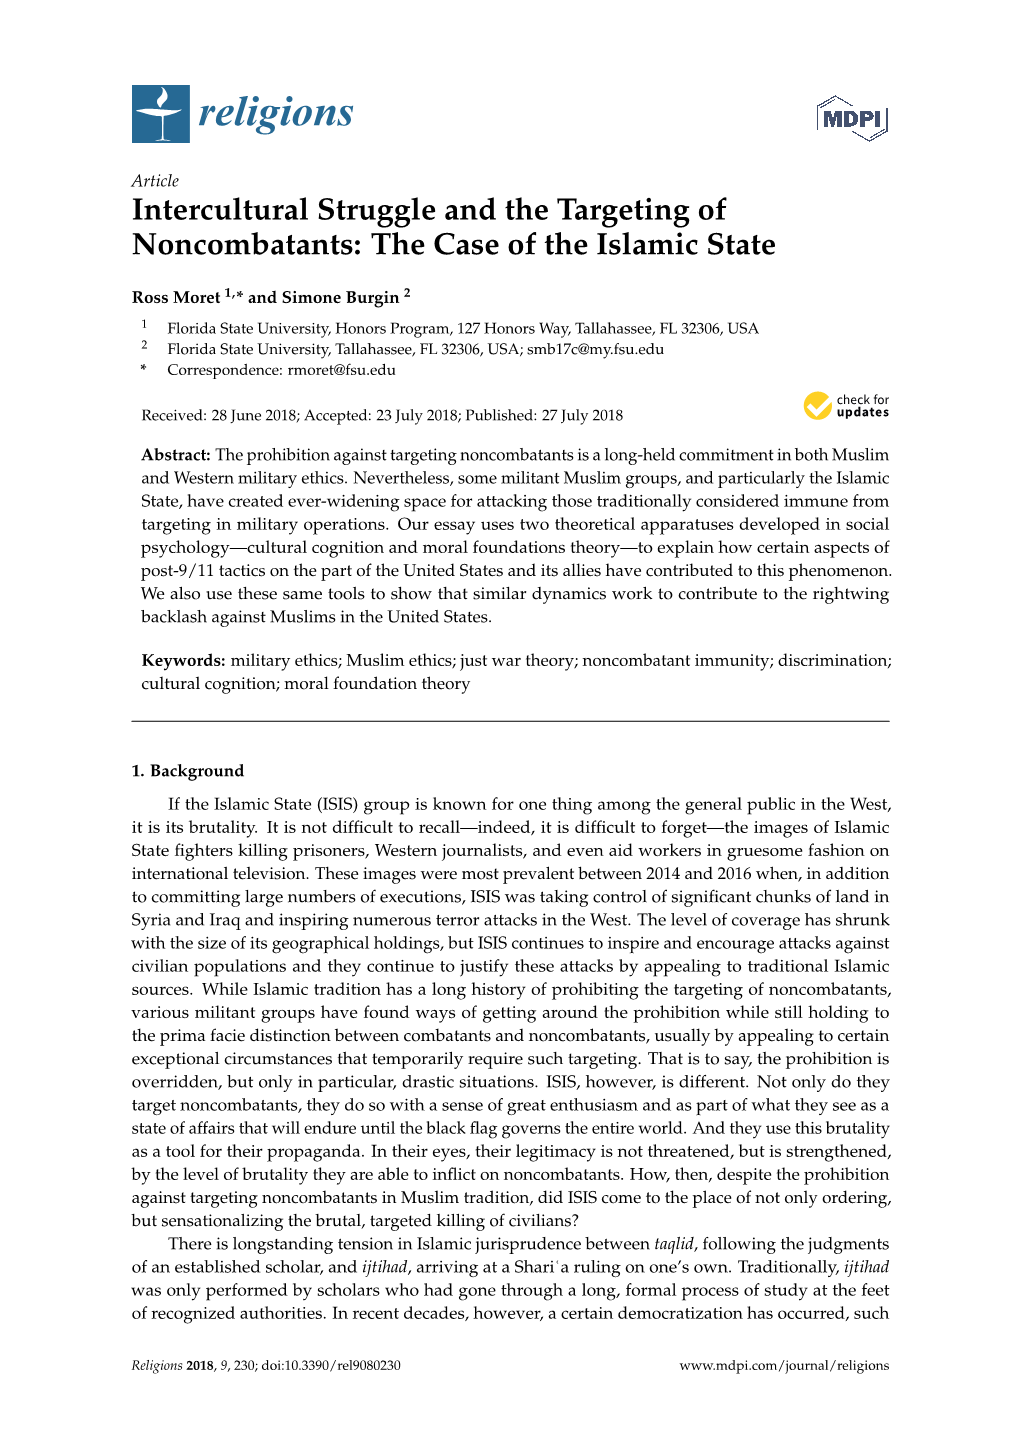 Intercultural Struggle and the Targeting of Noncombatants: the Case of the Islamic State